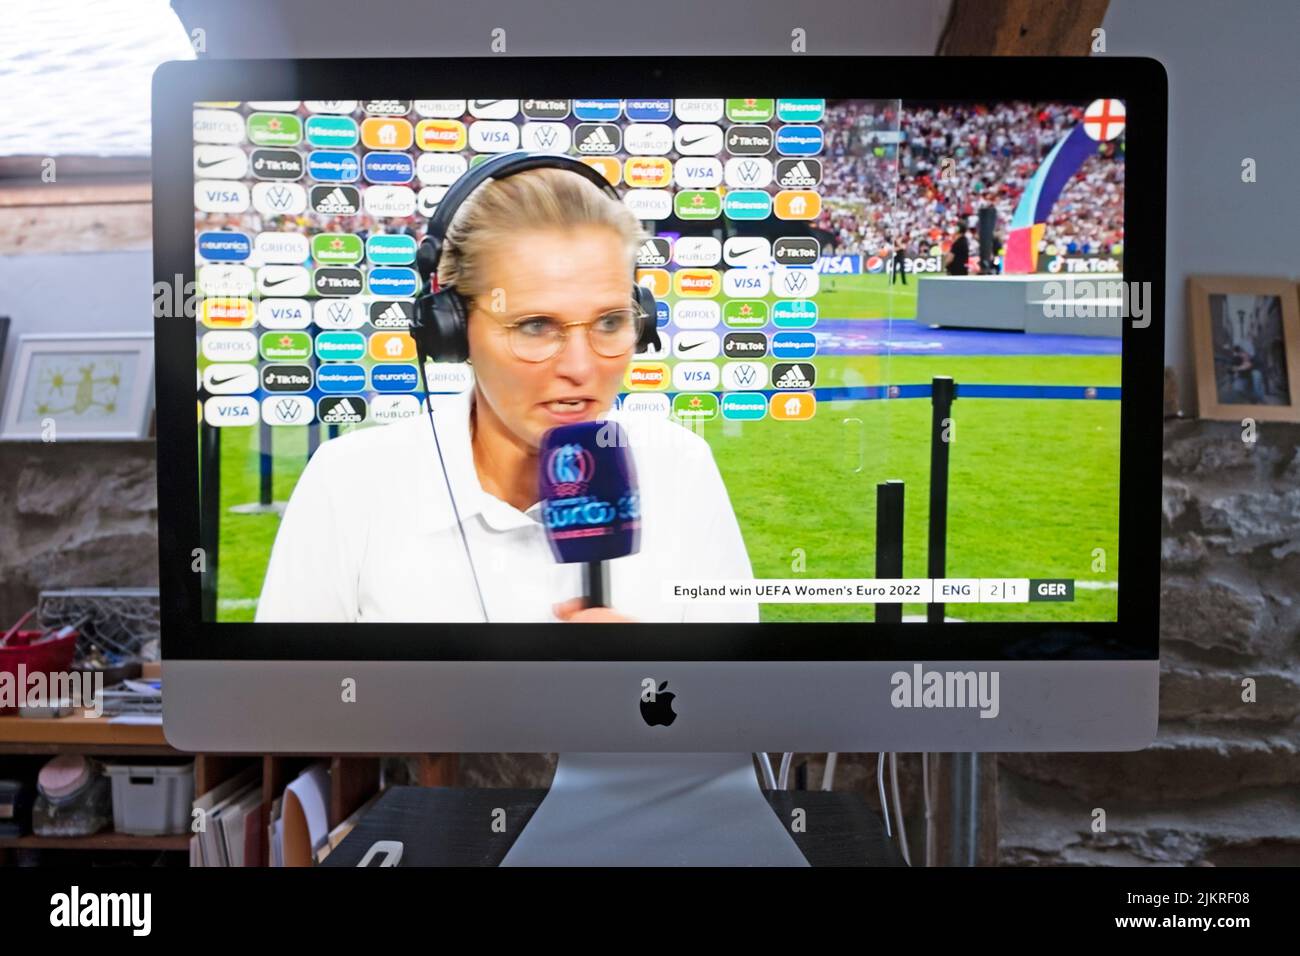 Women's England Lioness football coach Sarina Wiegman being interviewed on screen at Wembley stadium after win against Germany 31 July 2022 London UK Stock Photo